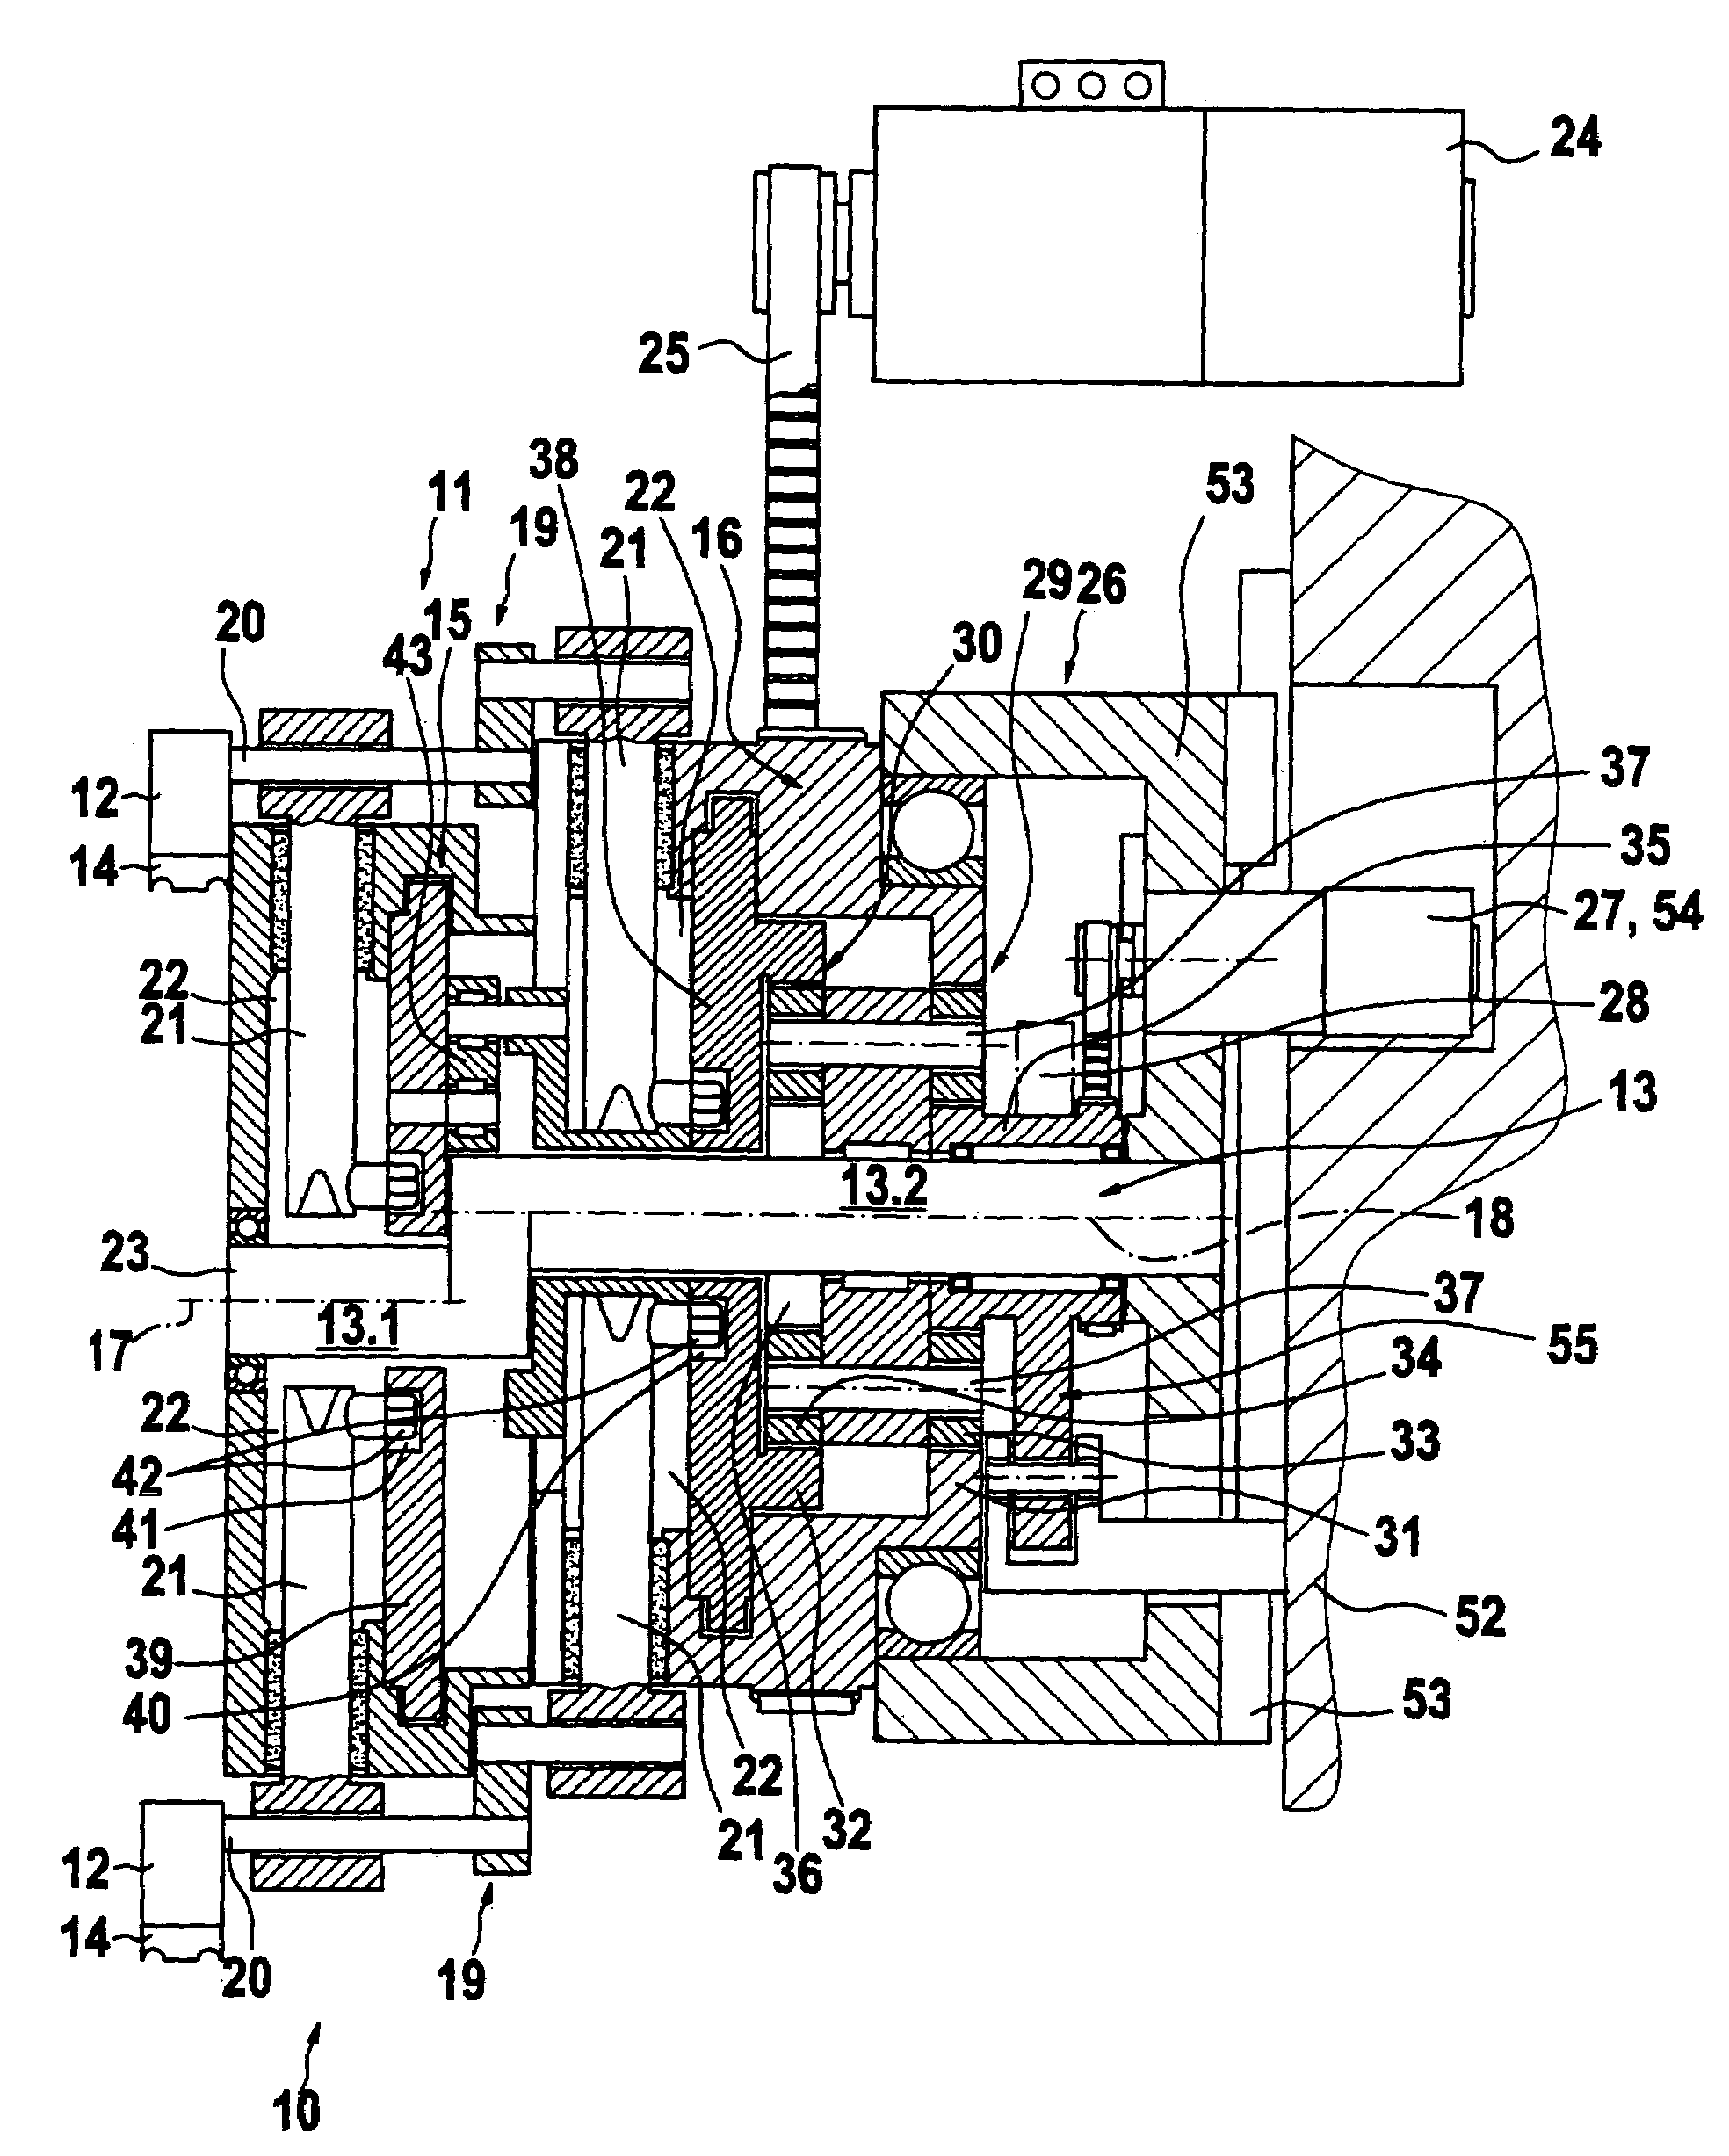 Apparatus for the transfer of rod-shaped articles